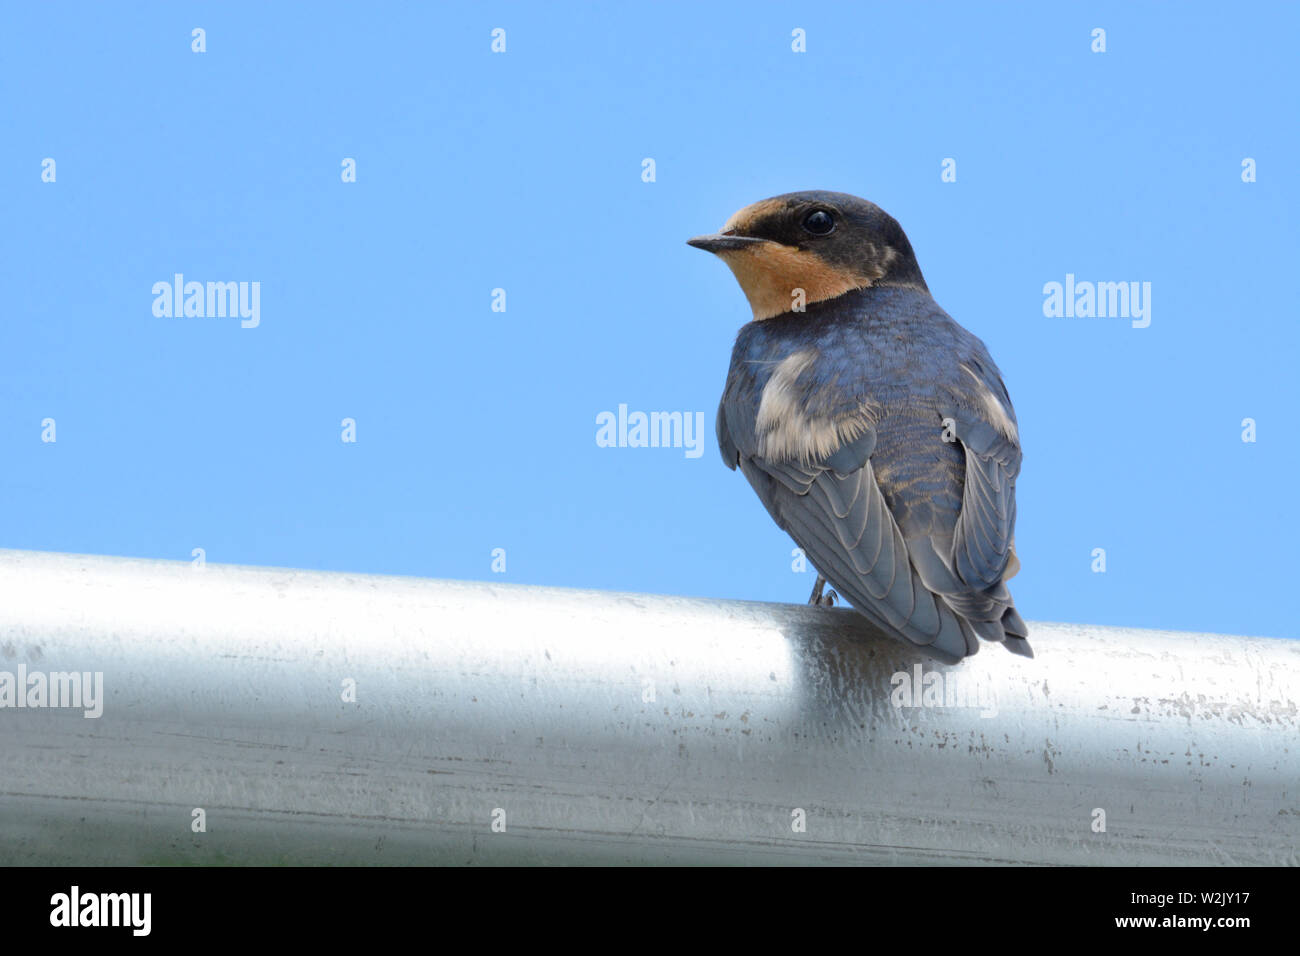 Urban wildlife of barn swallow or Hirundo rustica perched on chain link fence against sky Stock Photo